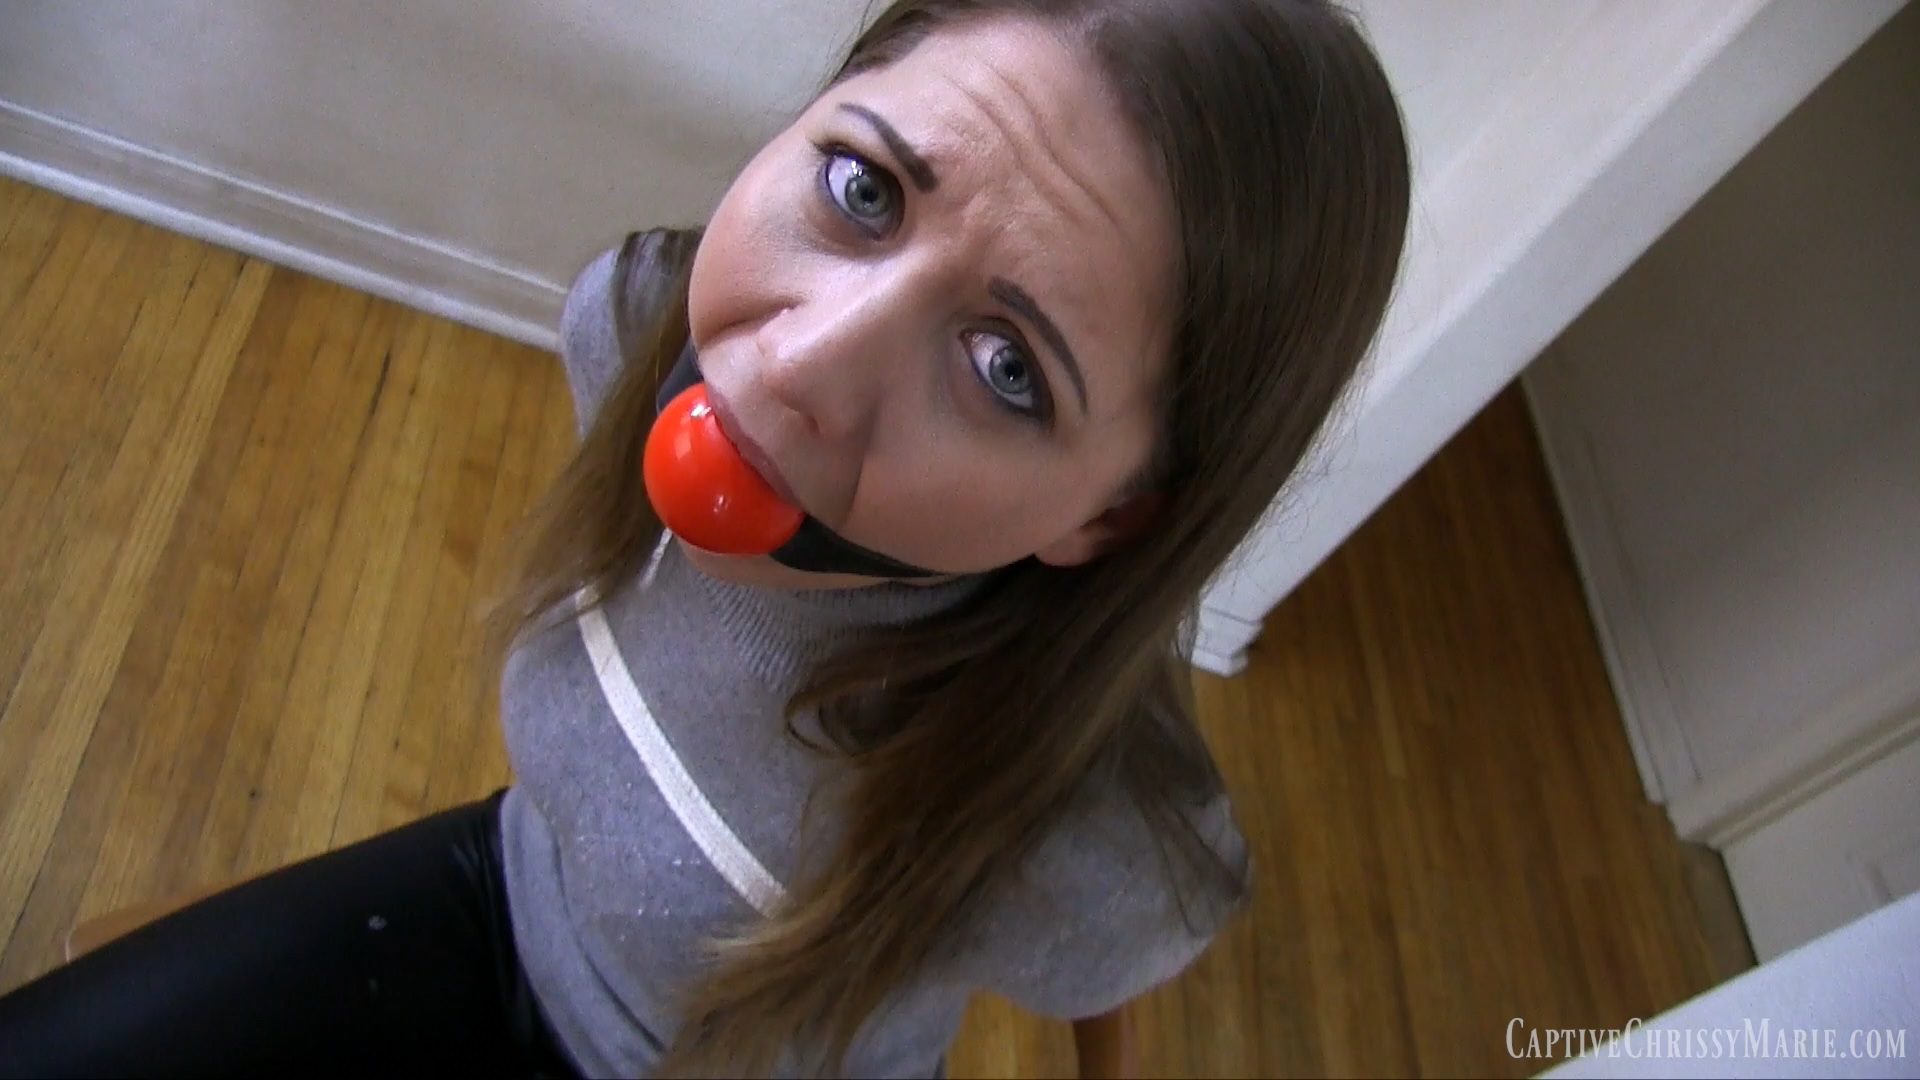 Girls leather leggings ballgagged drooling fan pictures